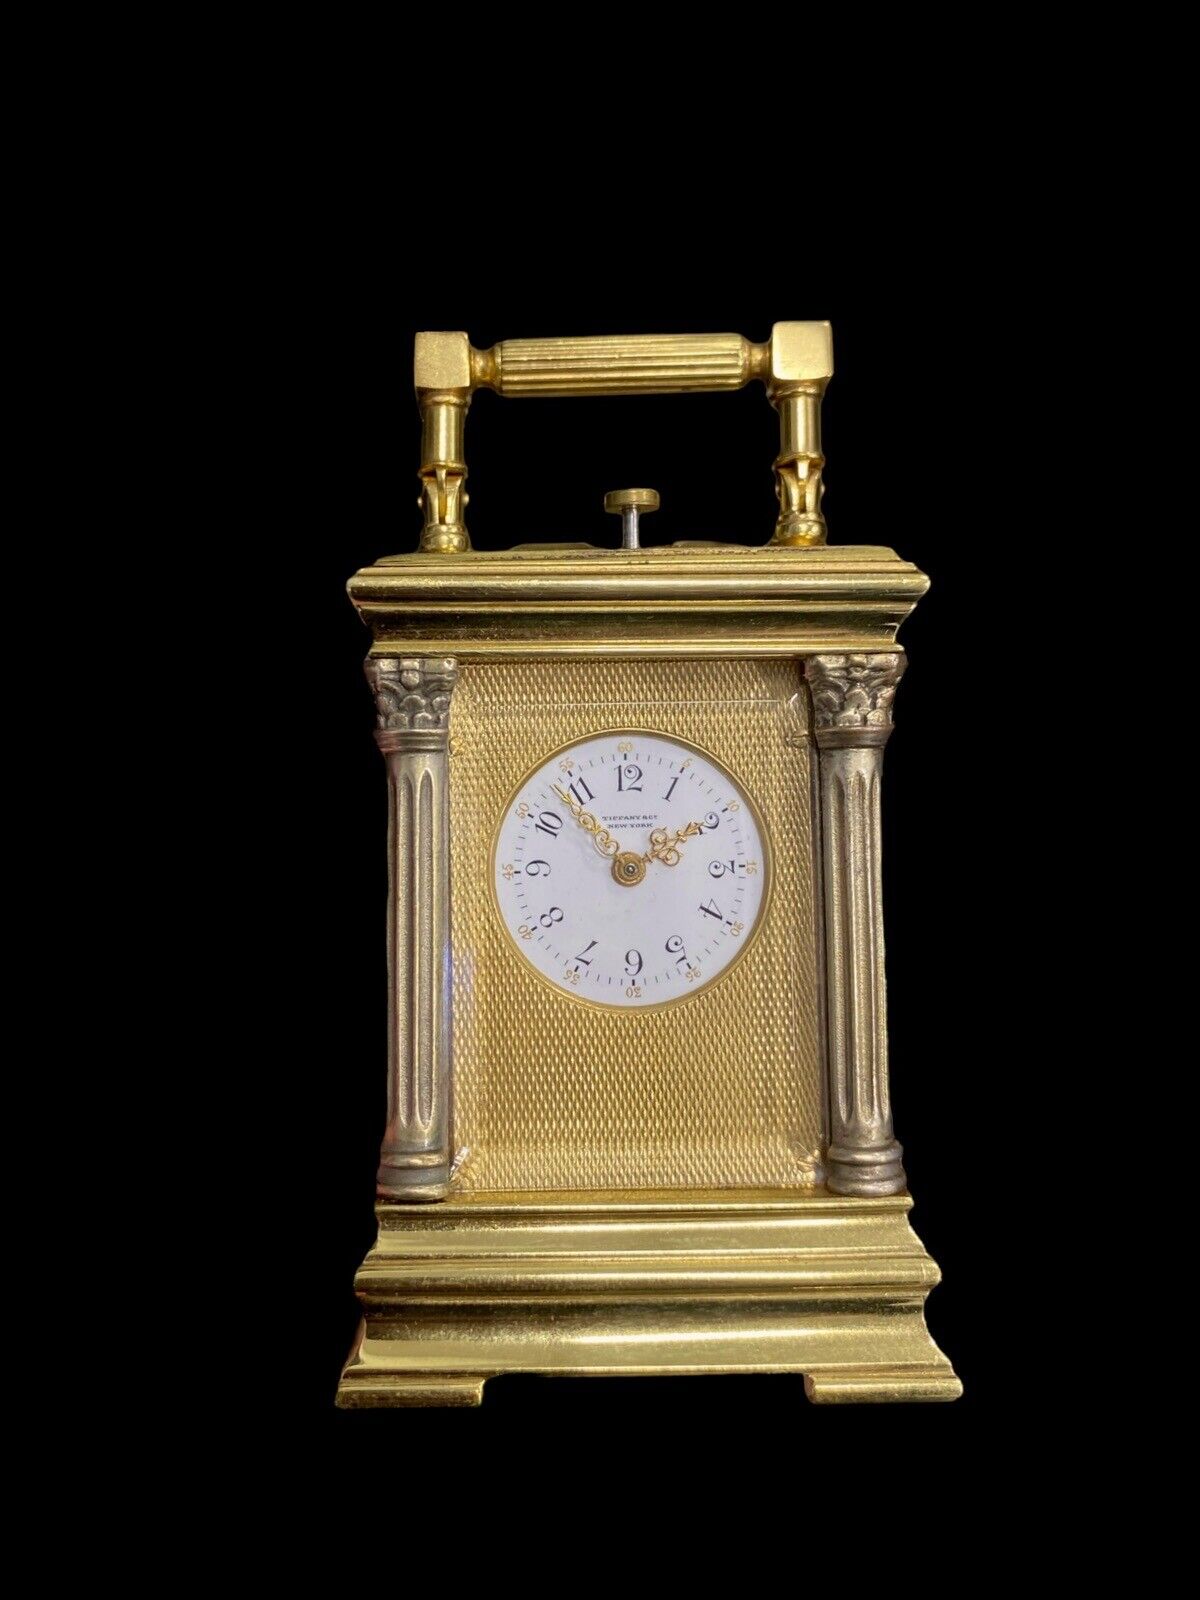 Tiffany & Co Antique French Miniature Carriage Clock Quarter Hour Repeater